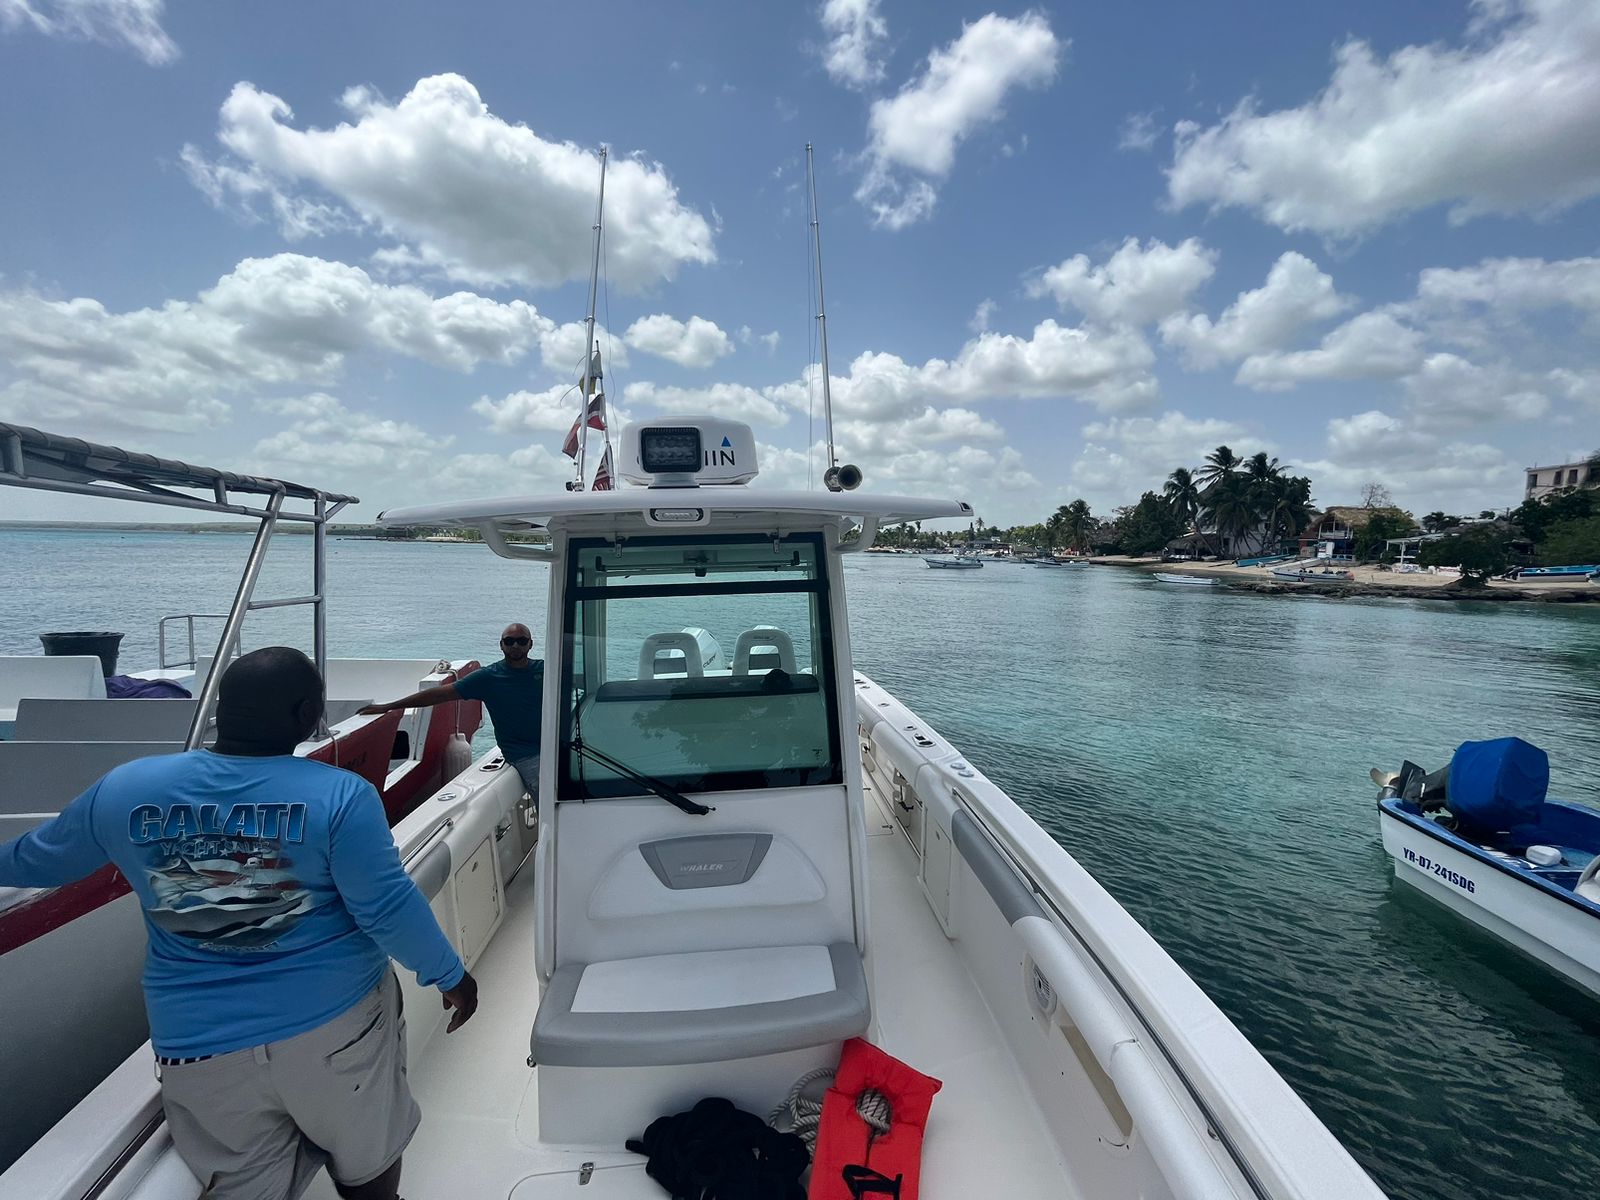 7828826323_Private_boat_charter_from_Bayahibe_to_Saona_or_Catalina_islands_speedboat.jpeg